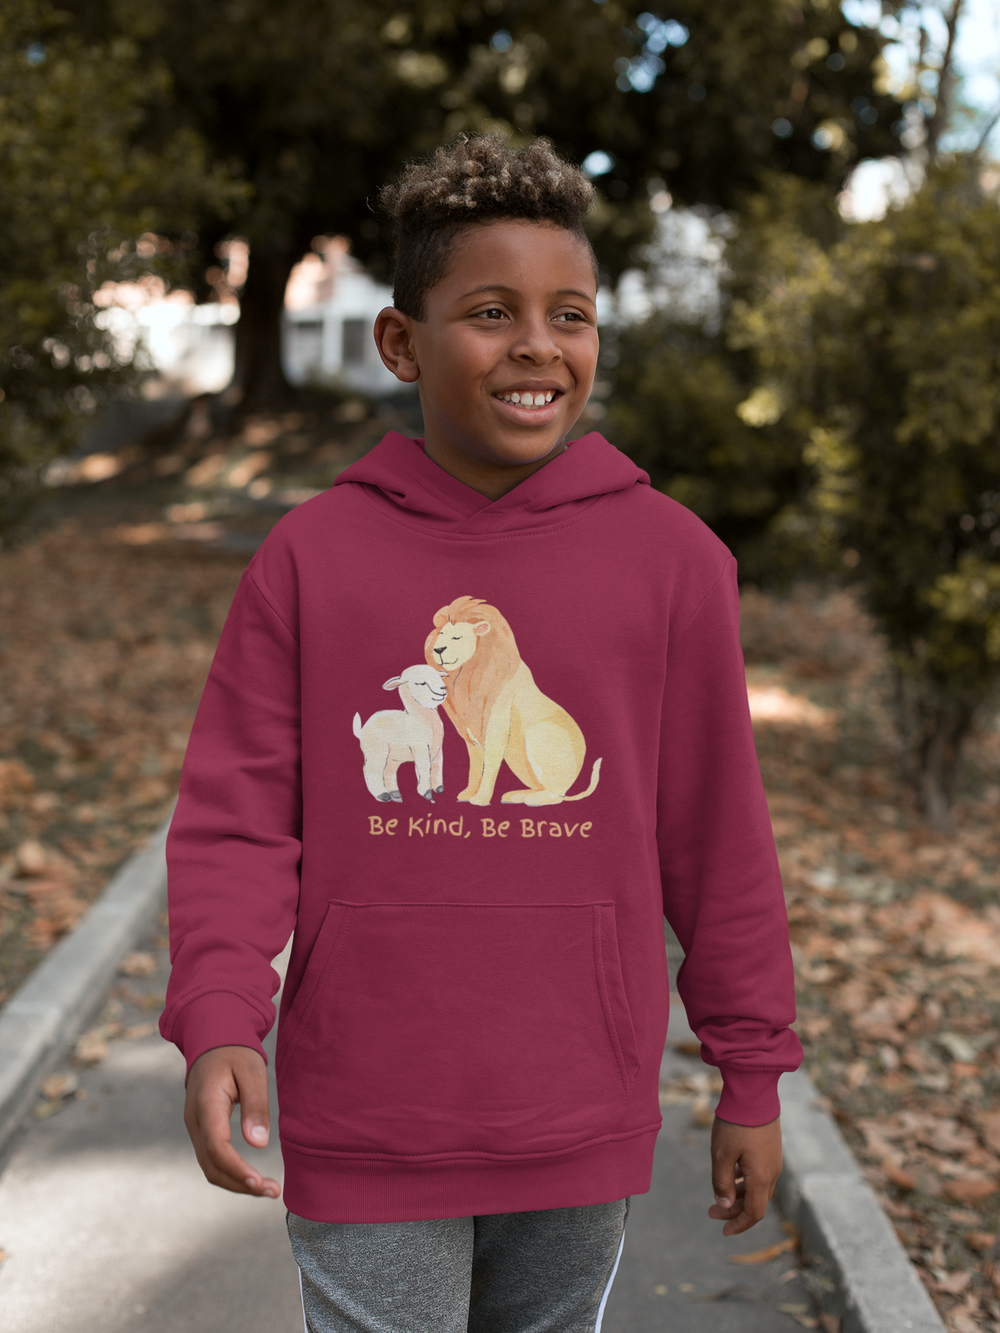 "Be Kind, Be Brave" Lamb & Lion Kids' Hoodie - Stand Bold with Kindness and Courage